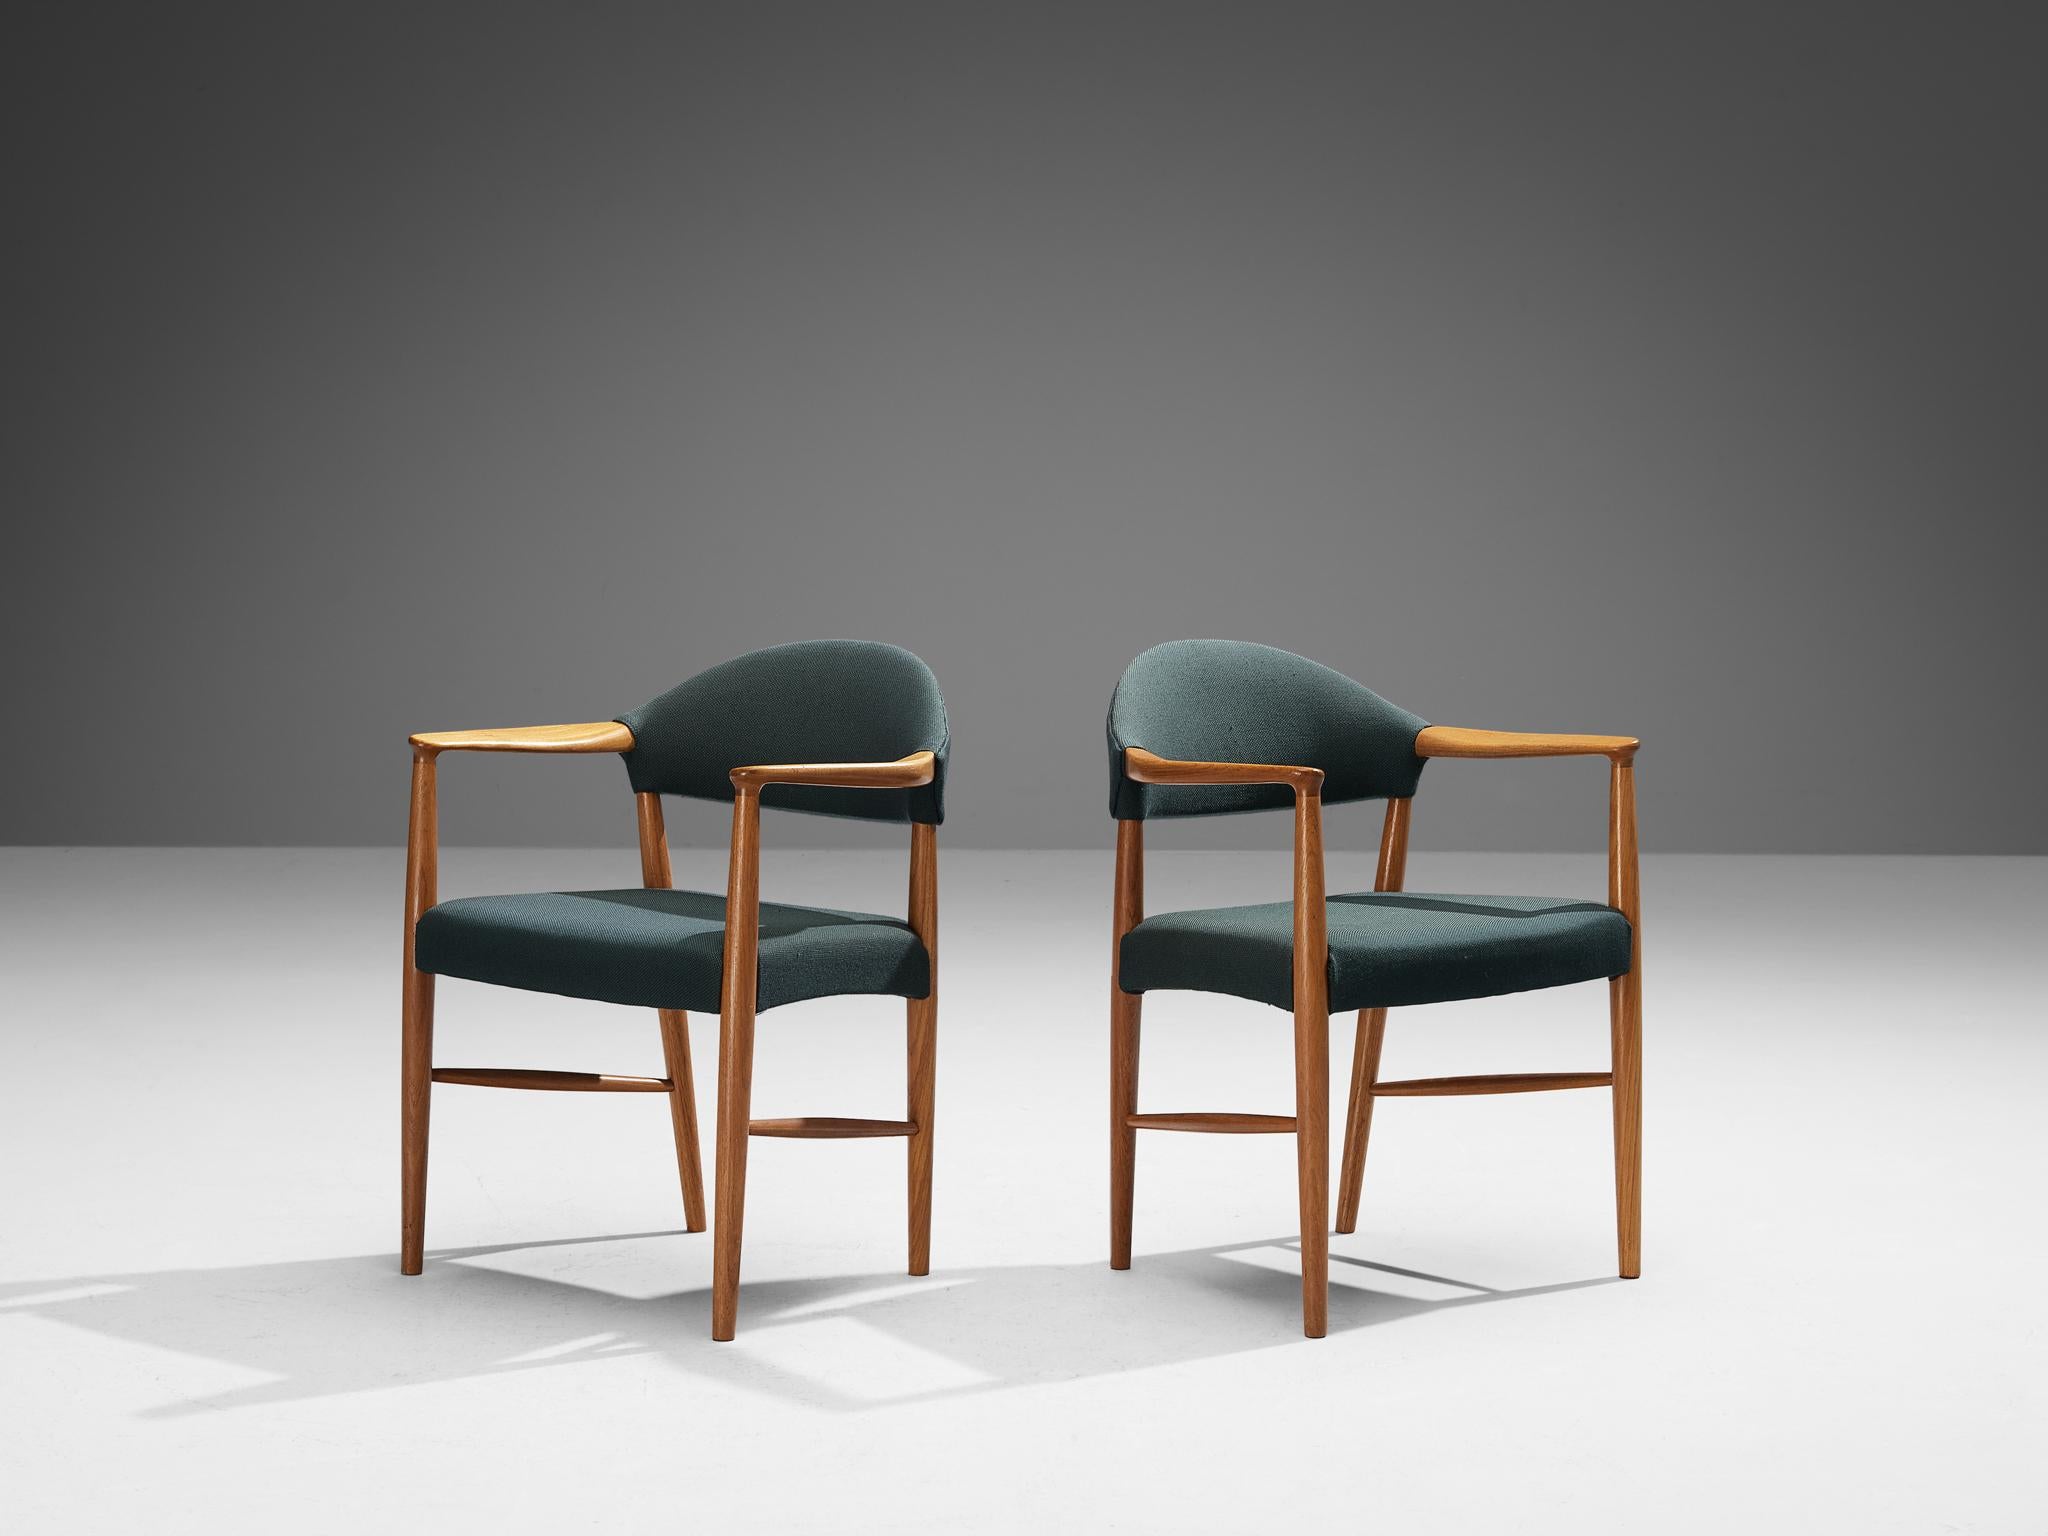 Kurt Olsen for Slagelse Mobelvaerk, dining chairs, model 223, fabric, teak, Denmark, 1960s

This armchair is designed by Kurt Olsen for Slagelse Mobelvaerk and epitomizes comfort and functionality through its impeccably shaped armrests and ergonomic